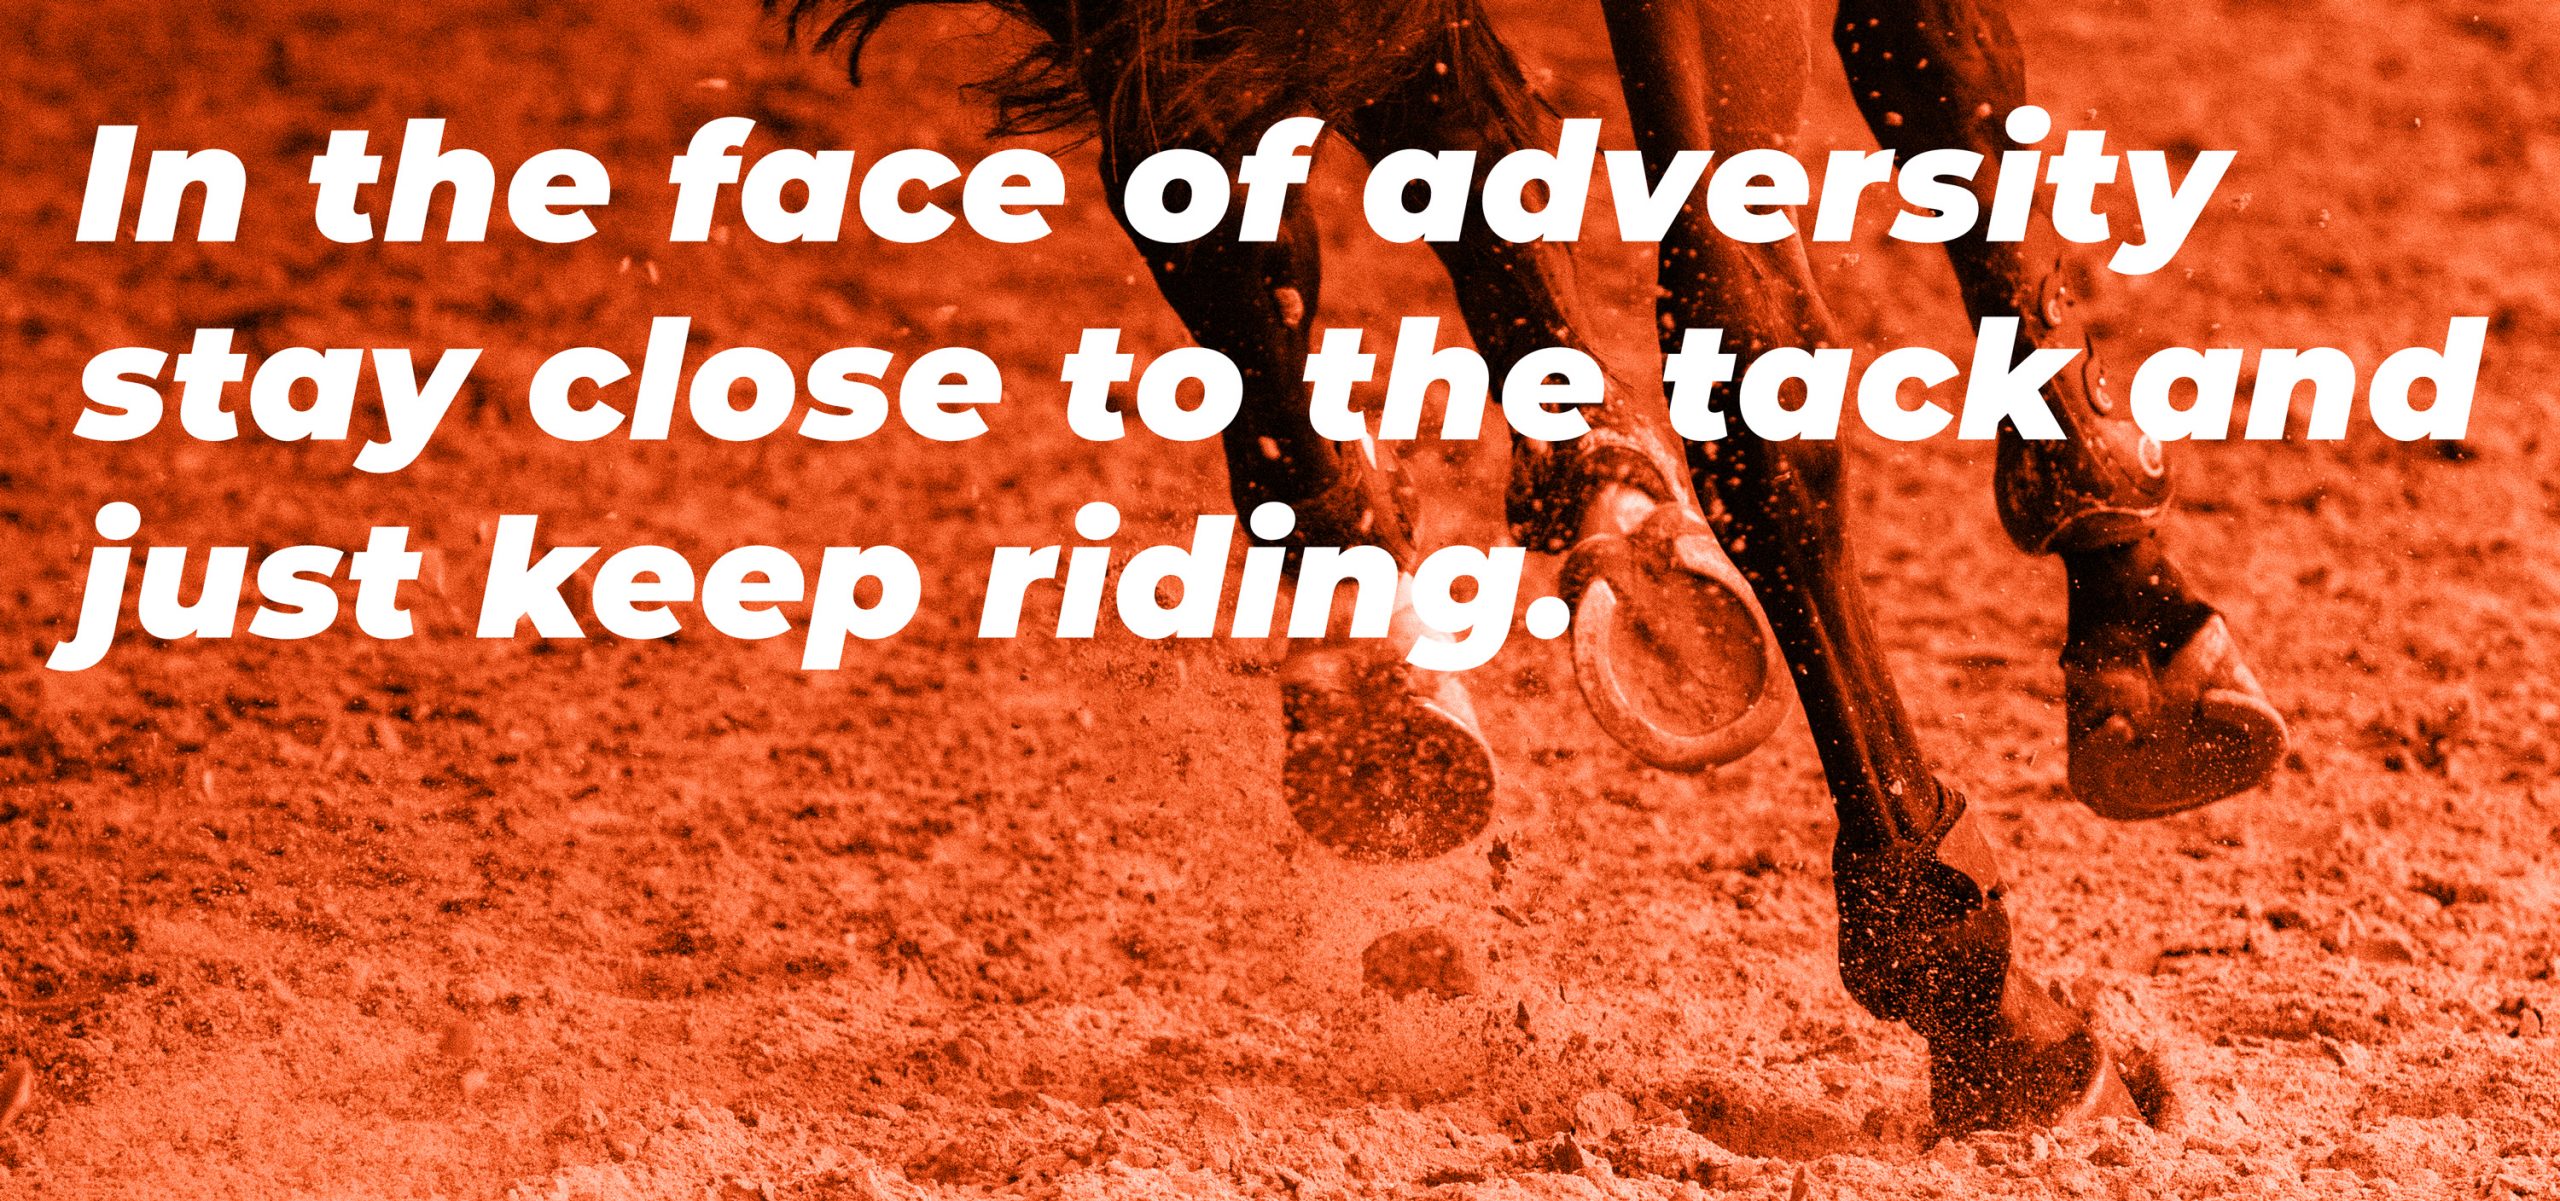 In the face of adversity stay close to the tack and just keep riding.